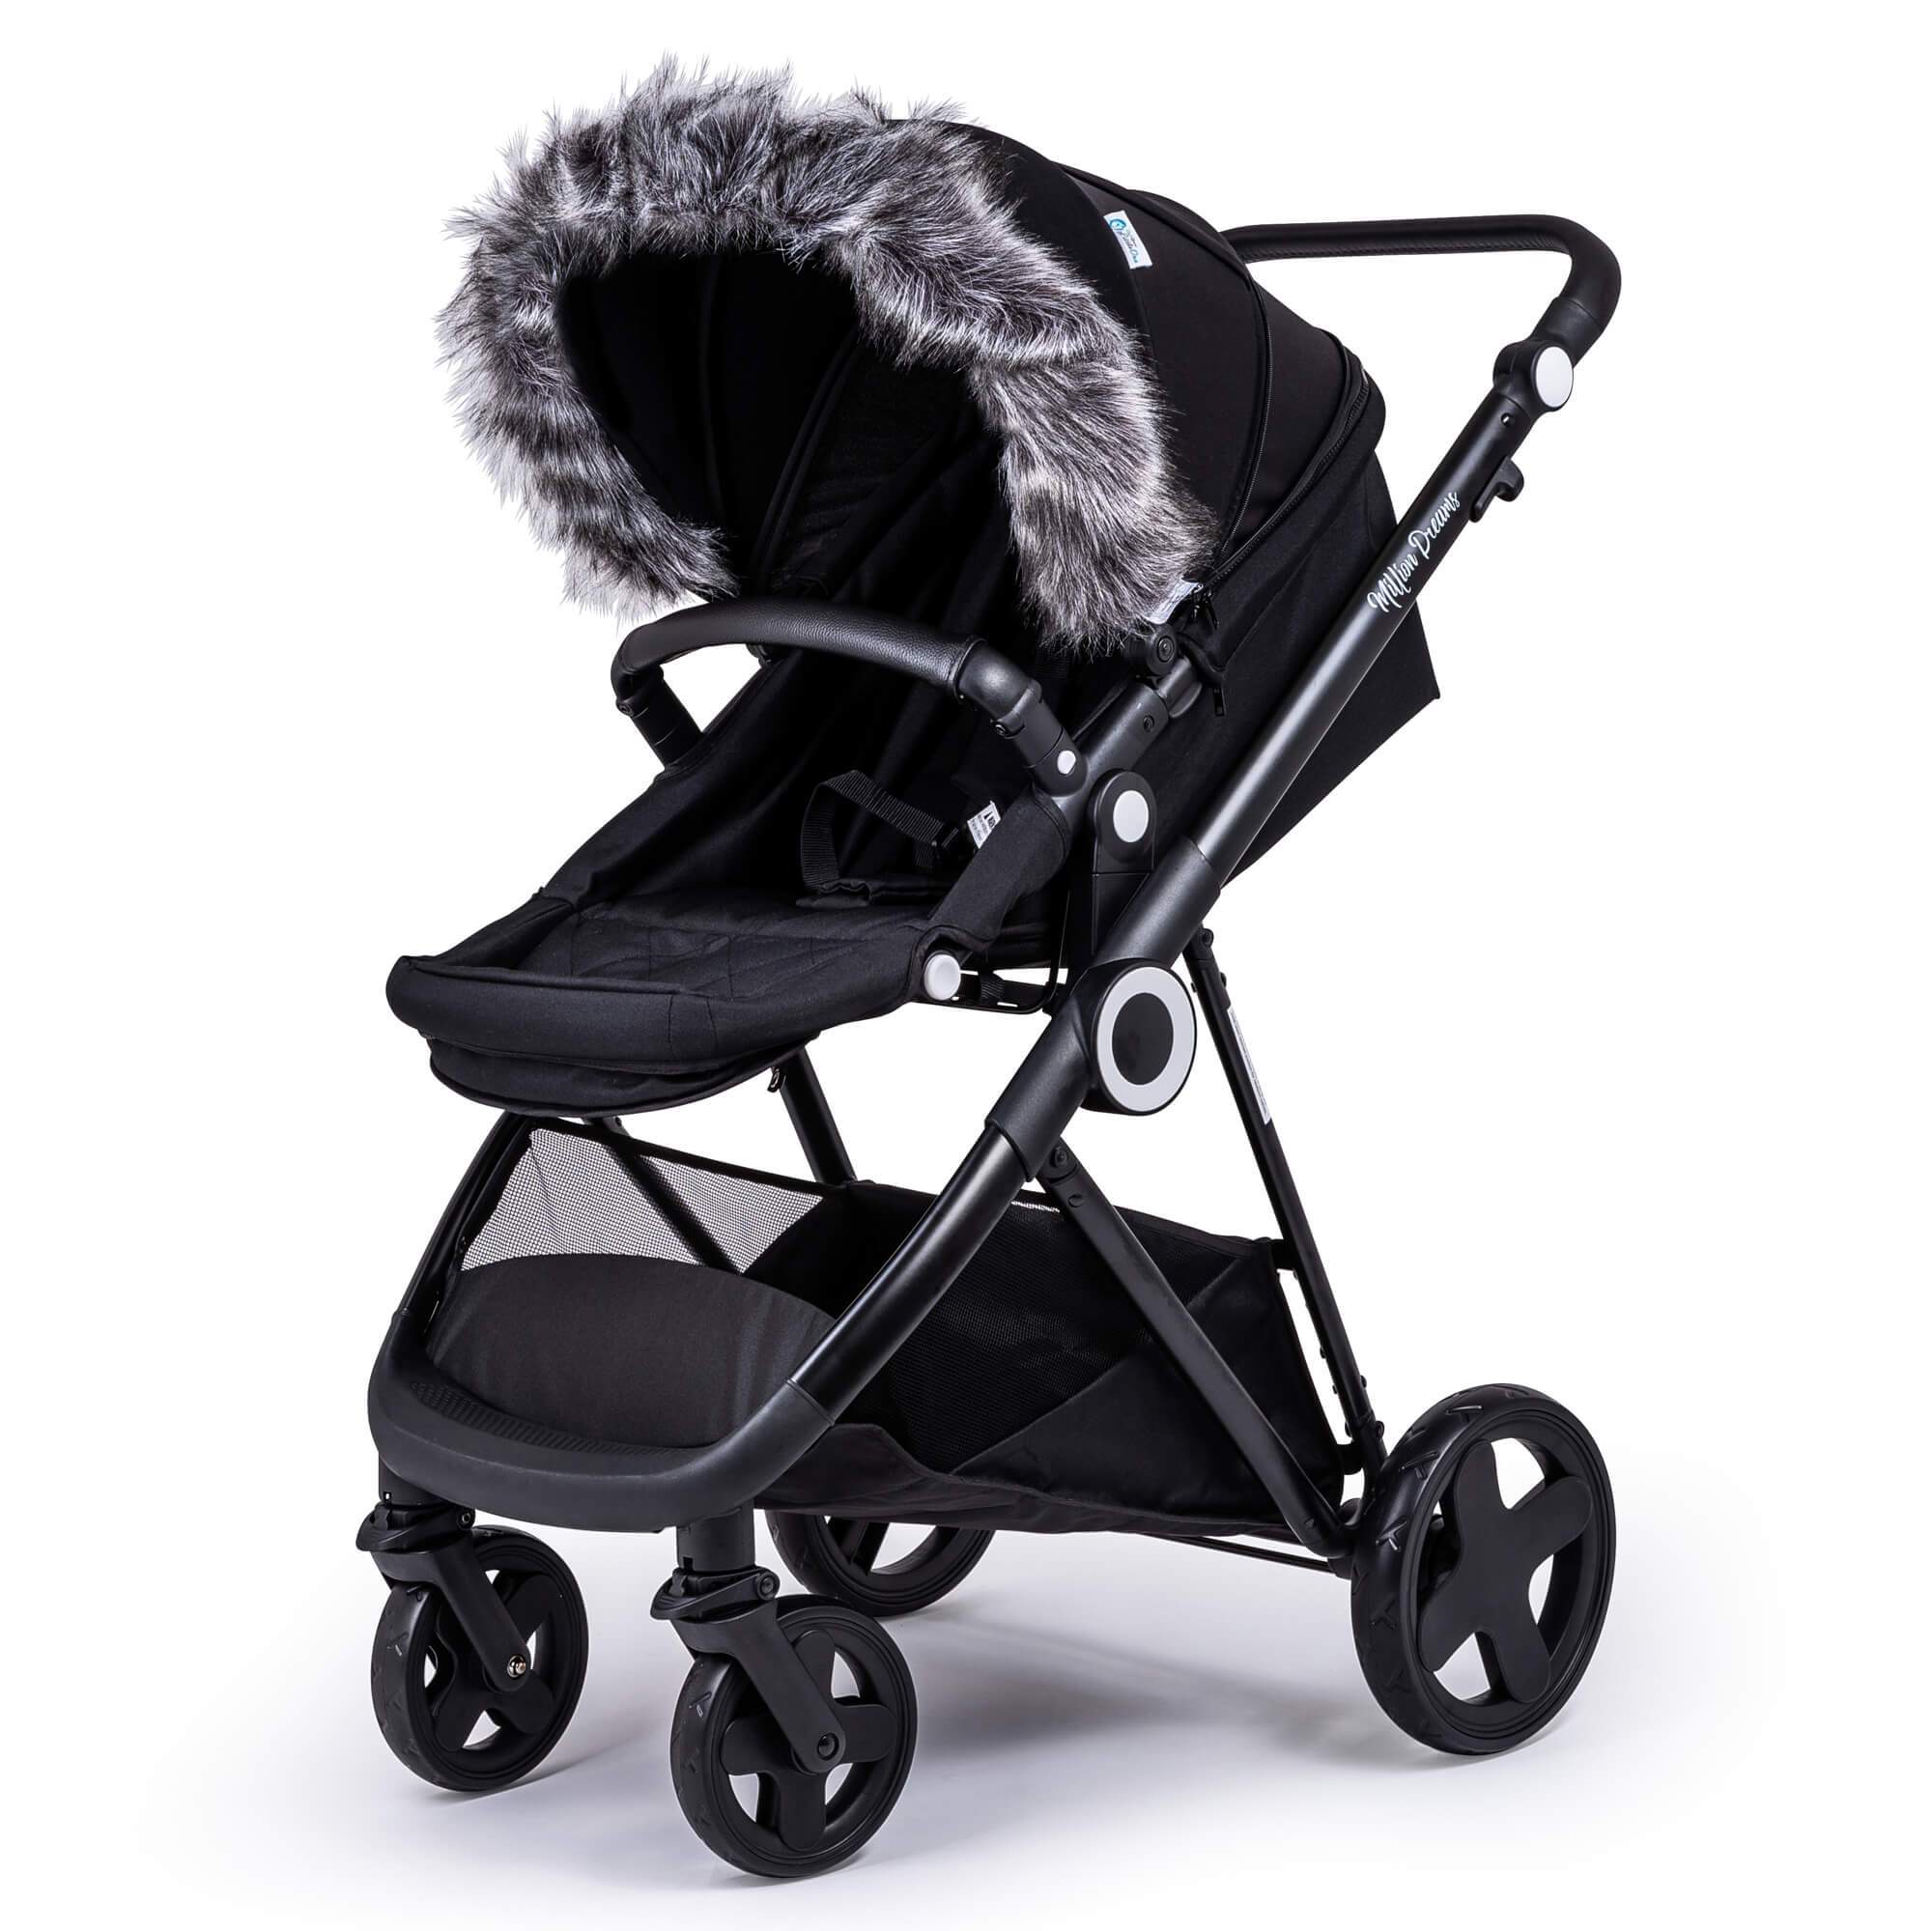 Pram Fur Hood Trim Attachment for Pushchair Compatible with Hesba - For Your Little One